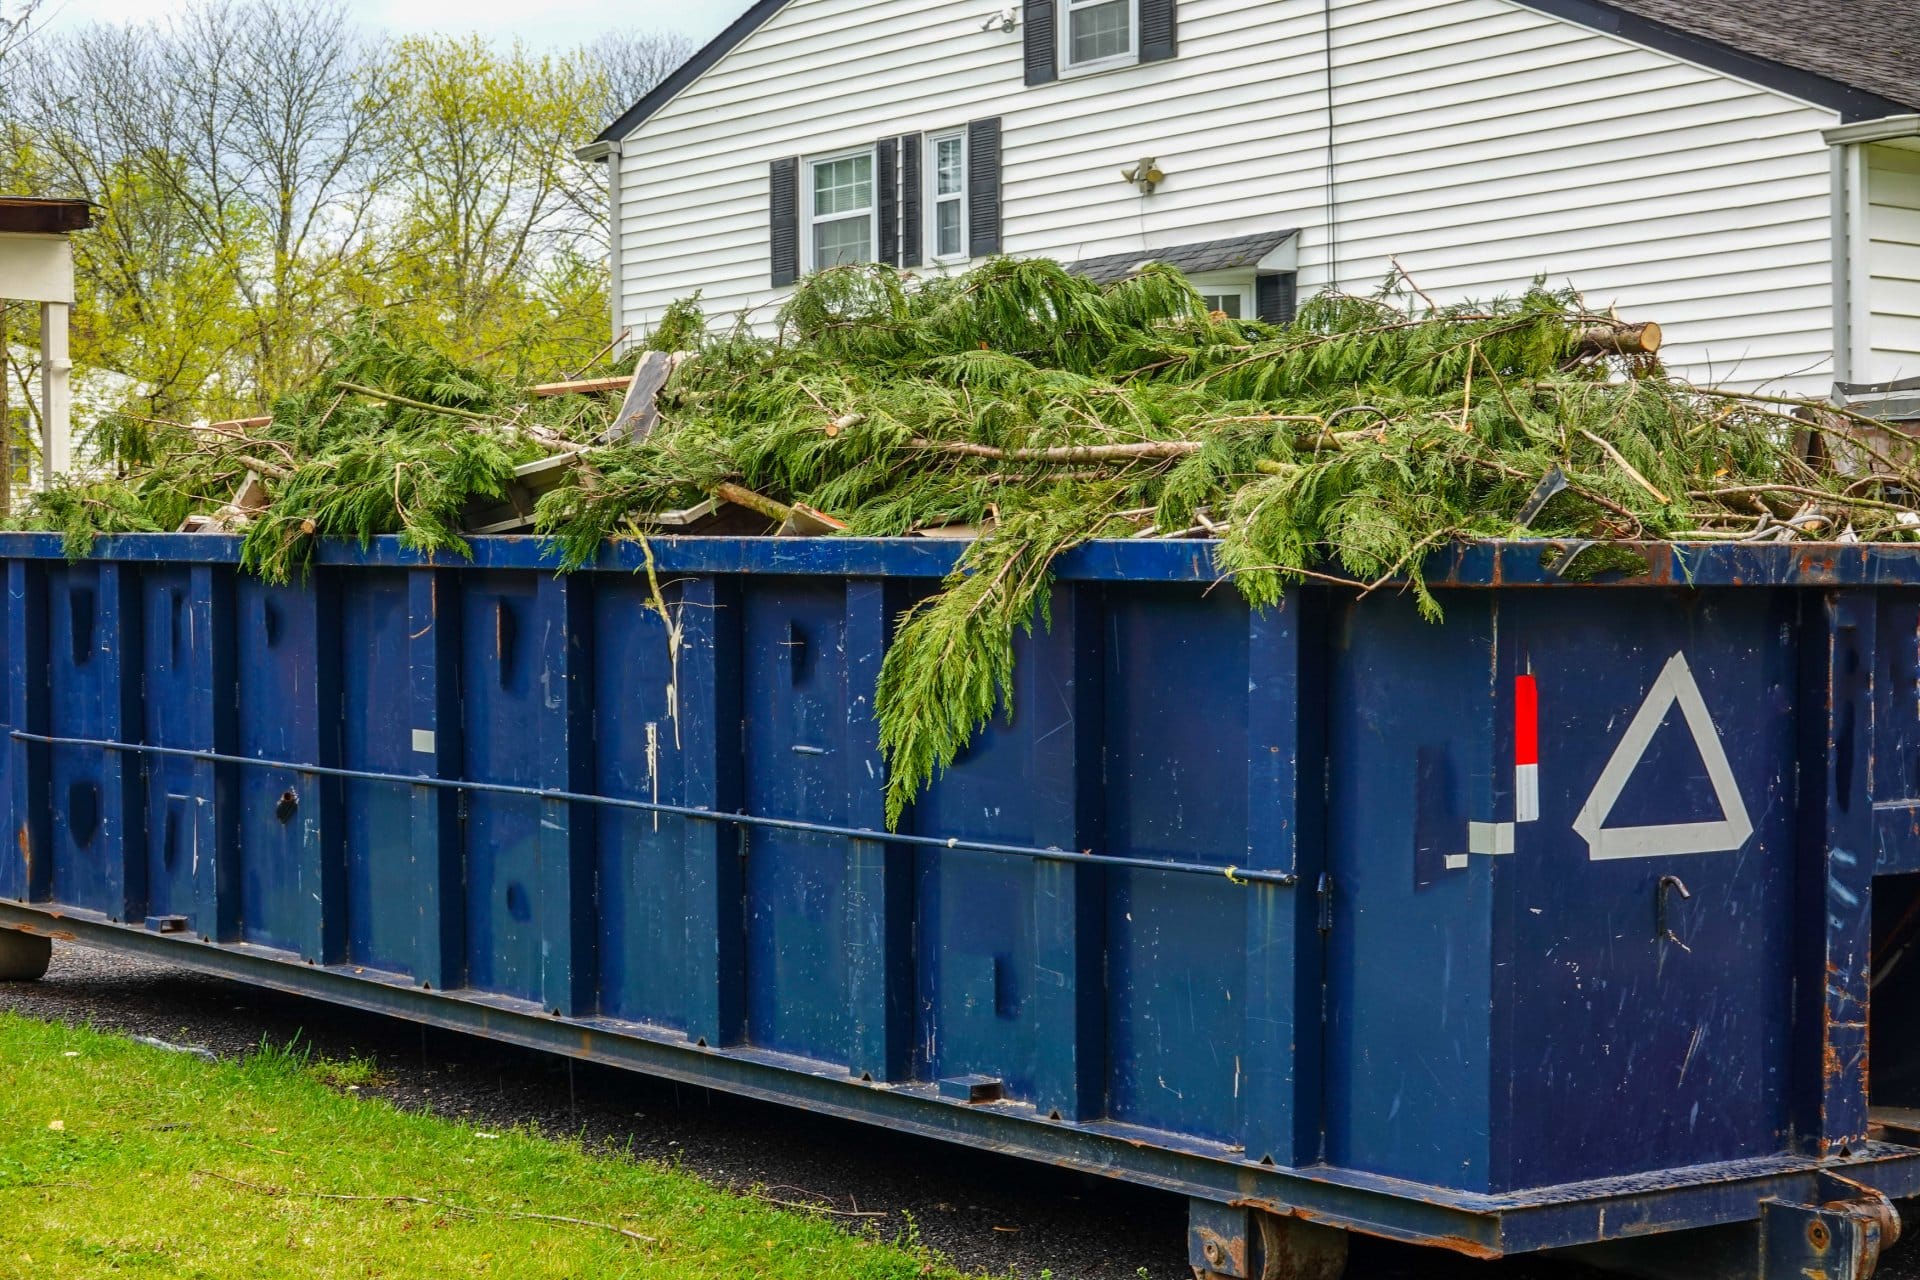 Emerging Trends in Dumpster Rental Services: What’s New?